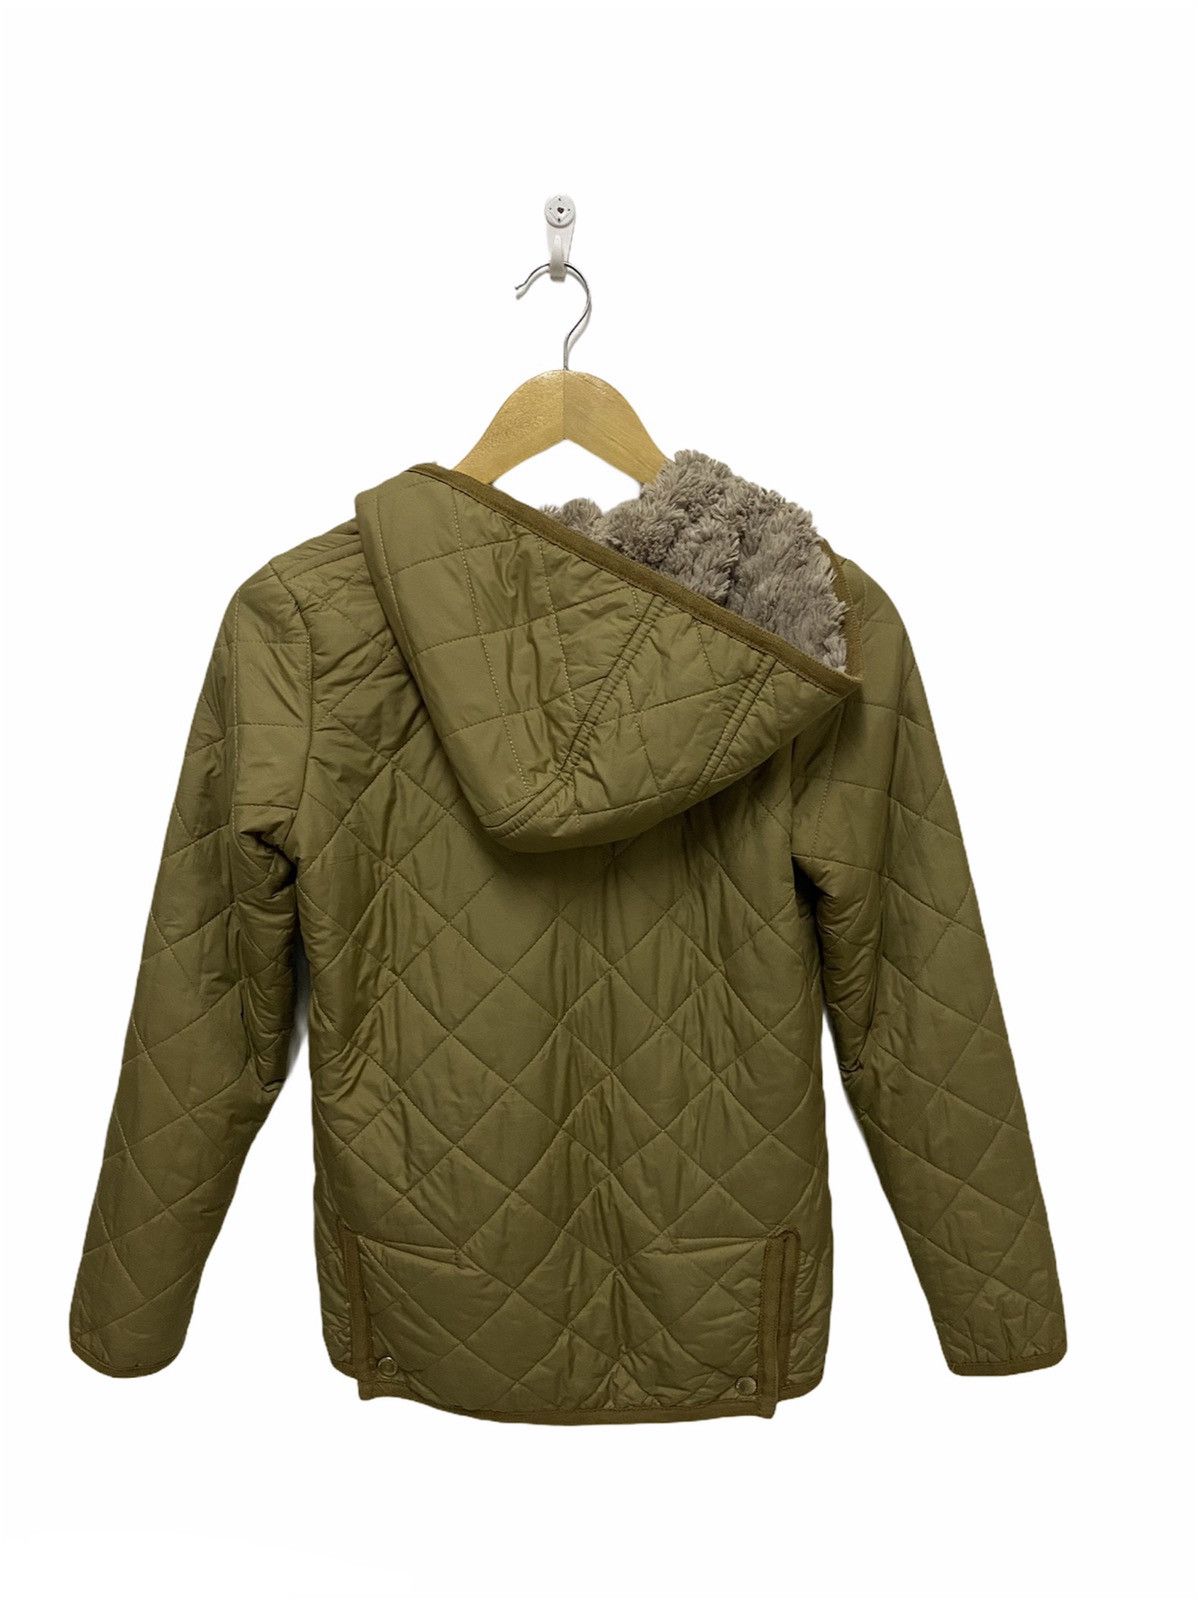 Mackintosh Fur Quilted Jacket Made in United Kingdom - 4